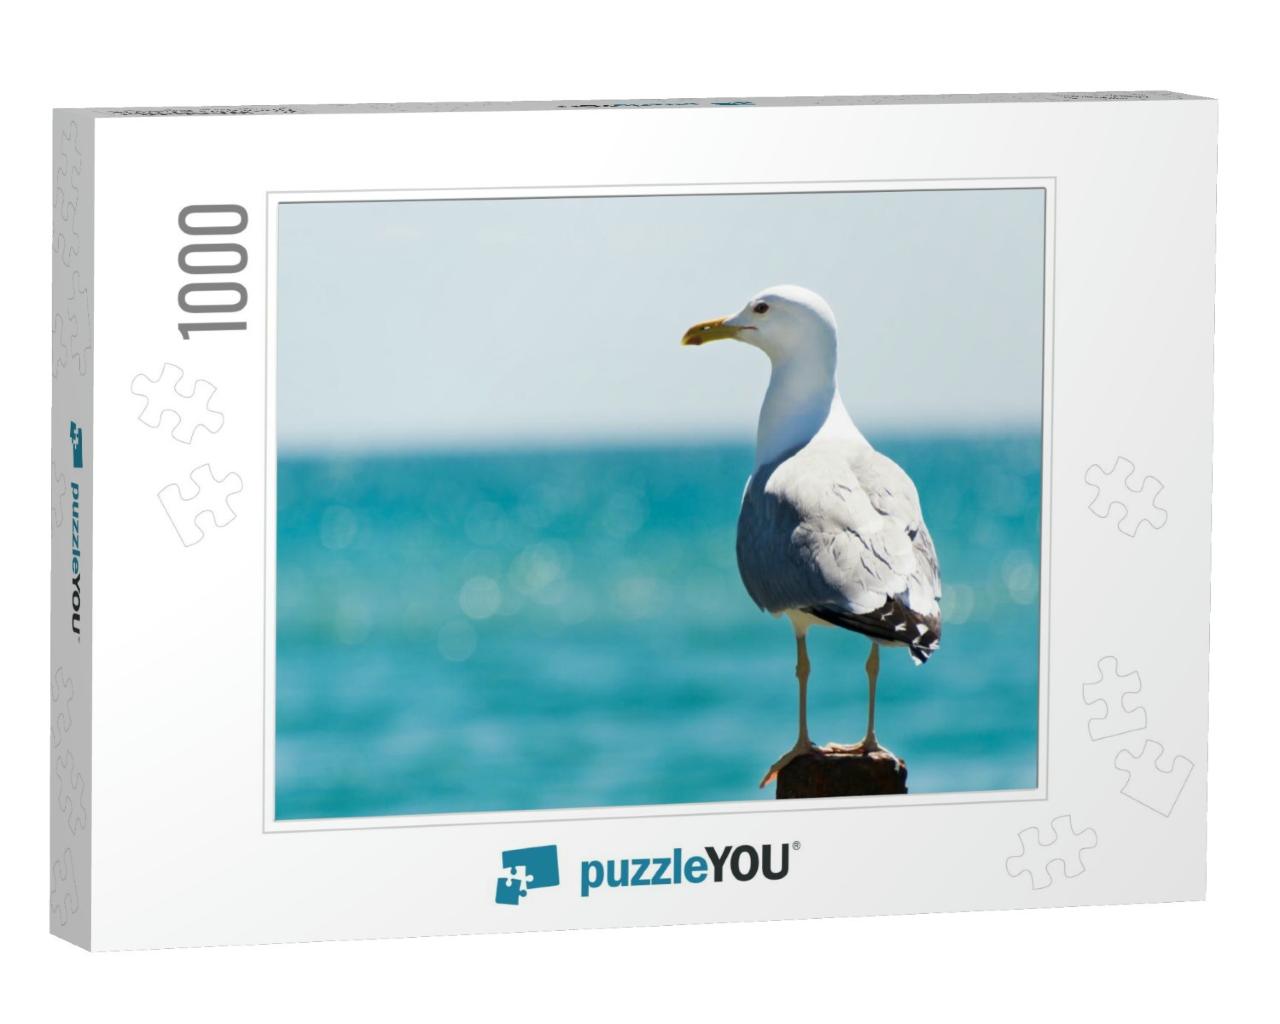 Seagull Portrait Against Sea Shore. Close Up View of Whit... Jigsaw Puzzle with 1000 pieces